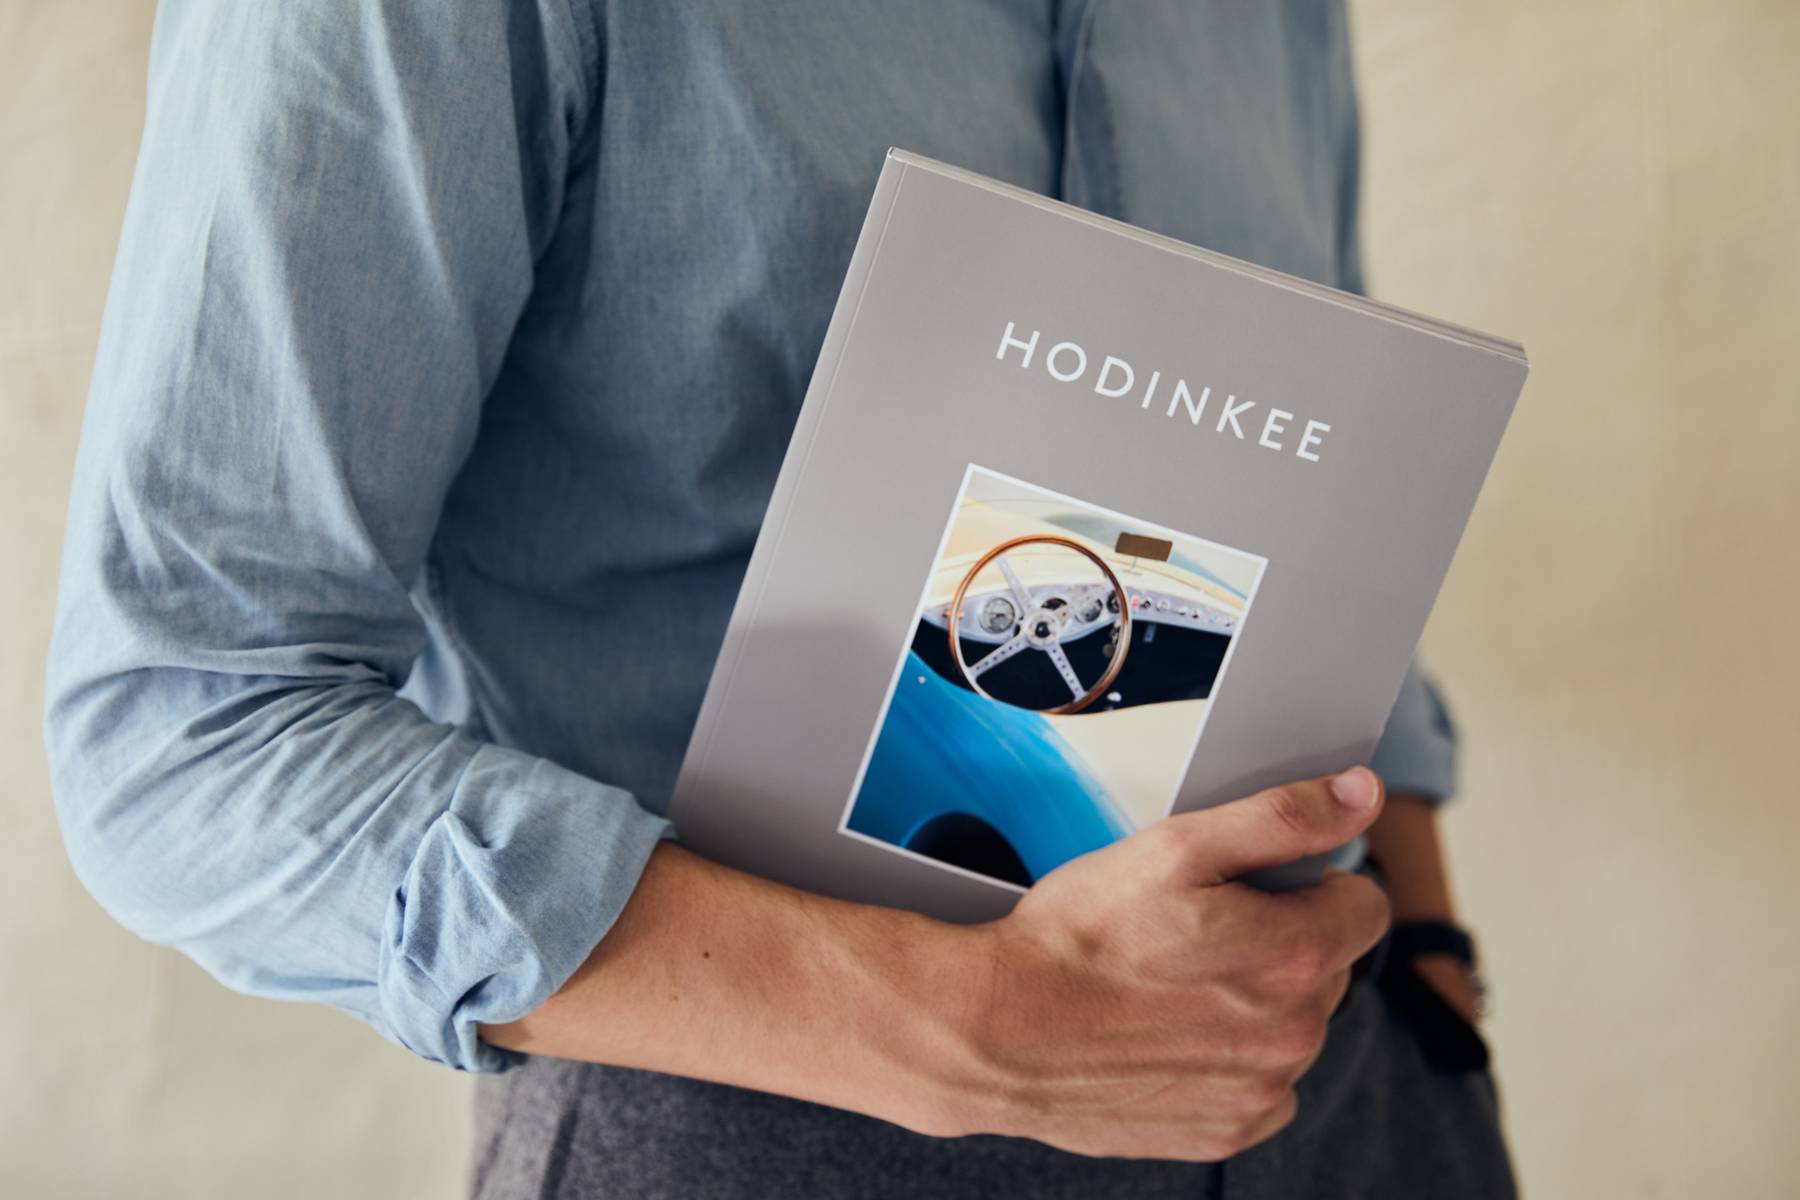 Hodinkee launched a biannual print magazine in 2017.